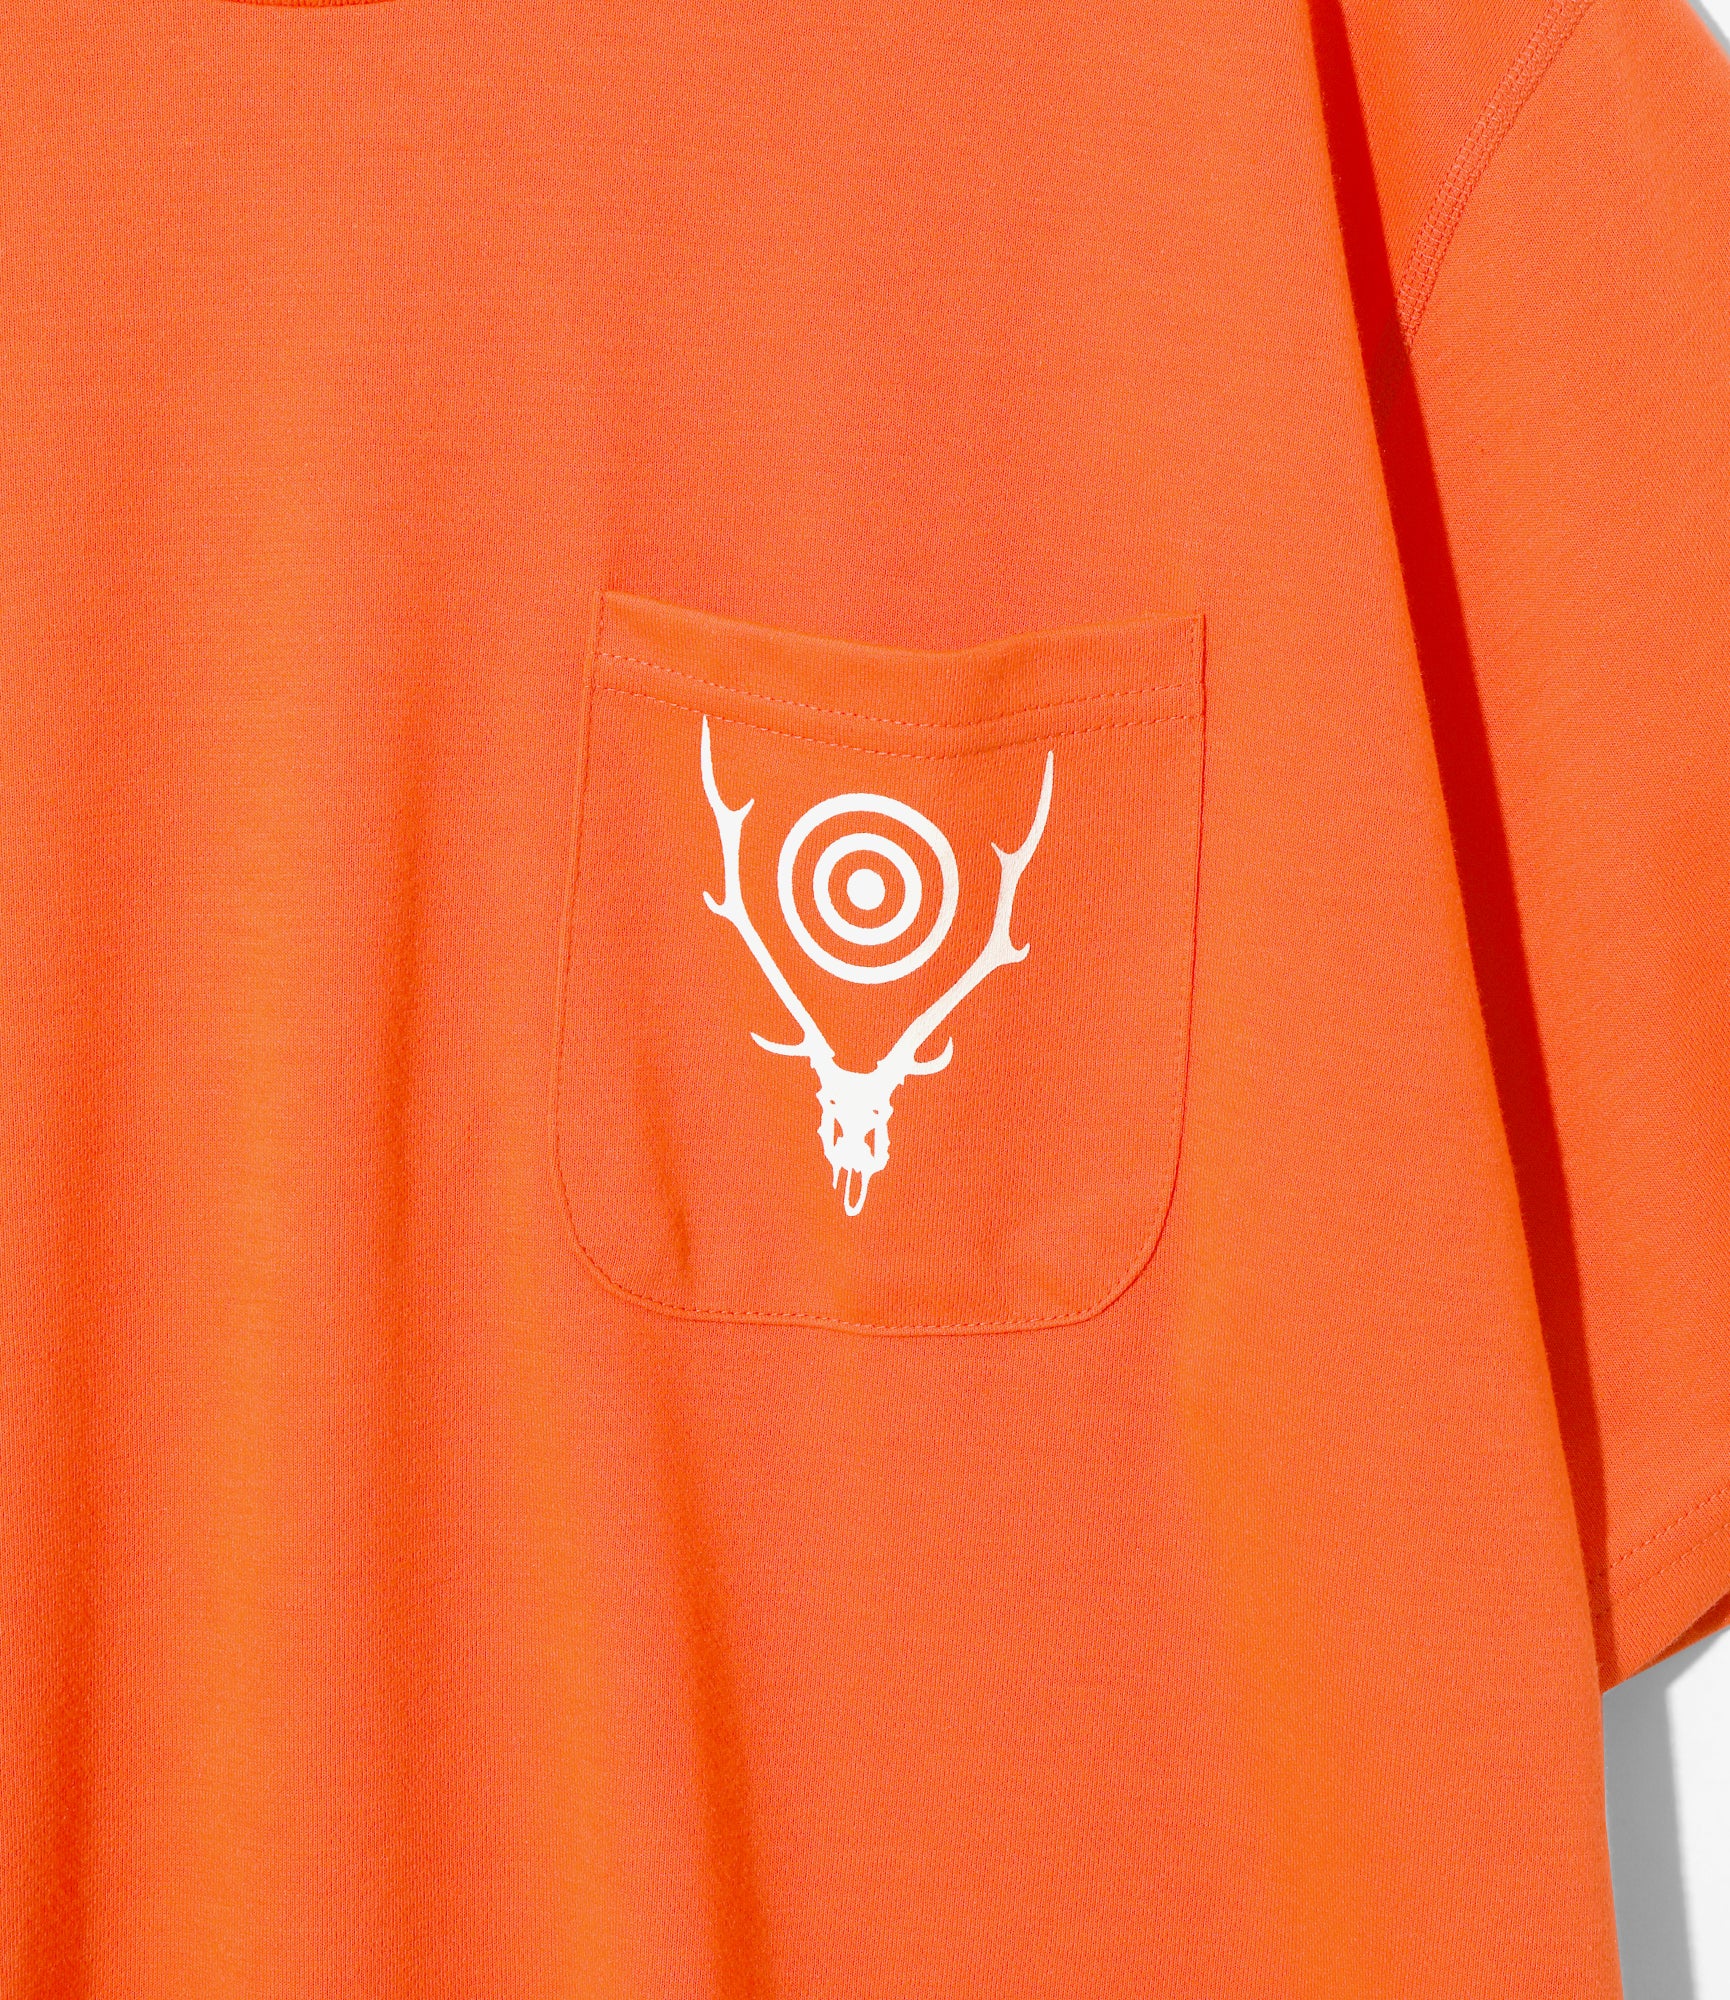 South2 West8 S/S Round Pocket Tee - Circle Horn - Orange – South2 West8 – Nepenthes London